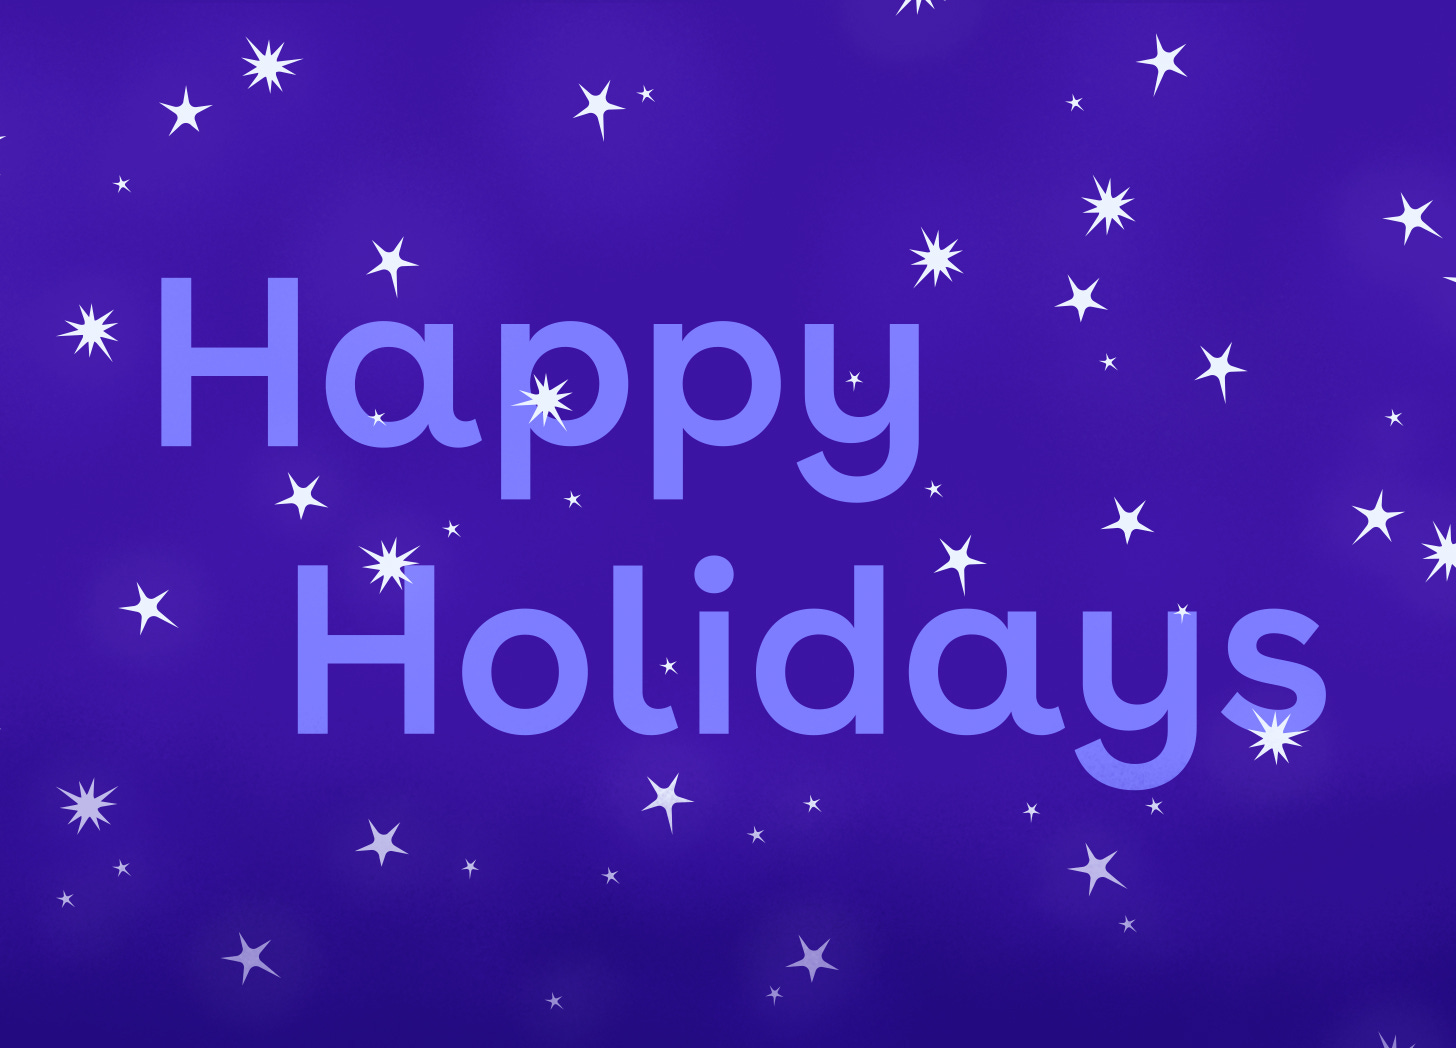 The words "Happy Holidays" are blue on a darker blue background, with little white stars all over the image.